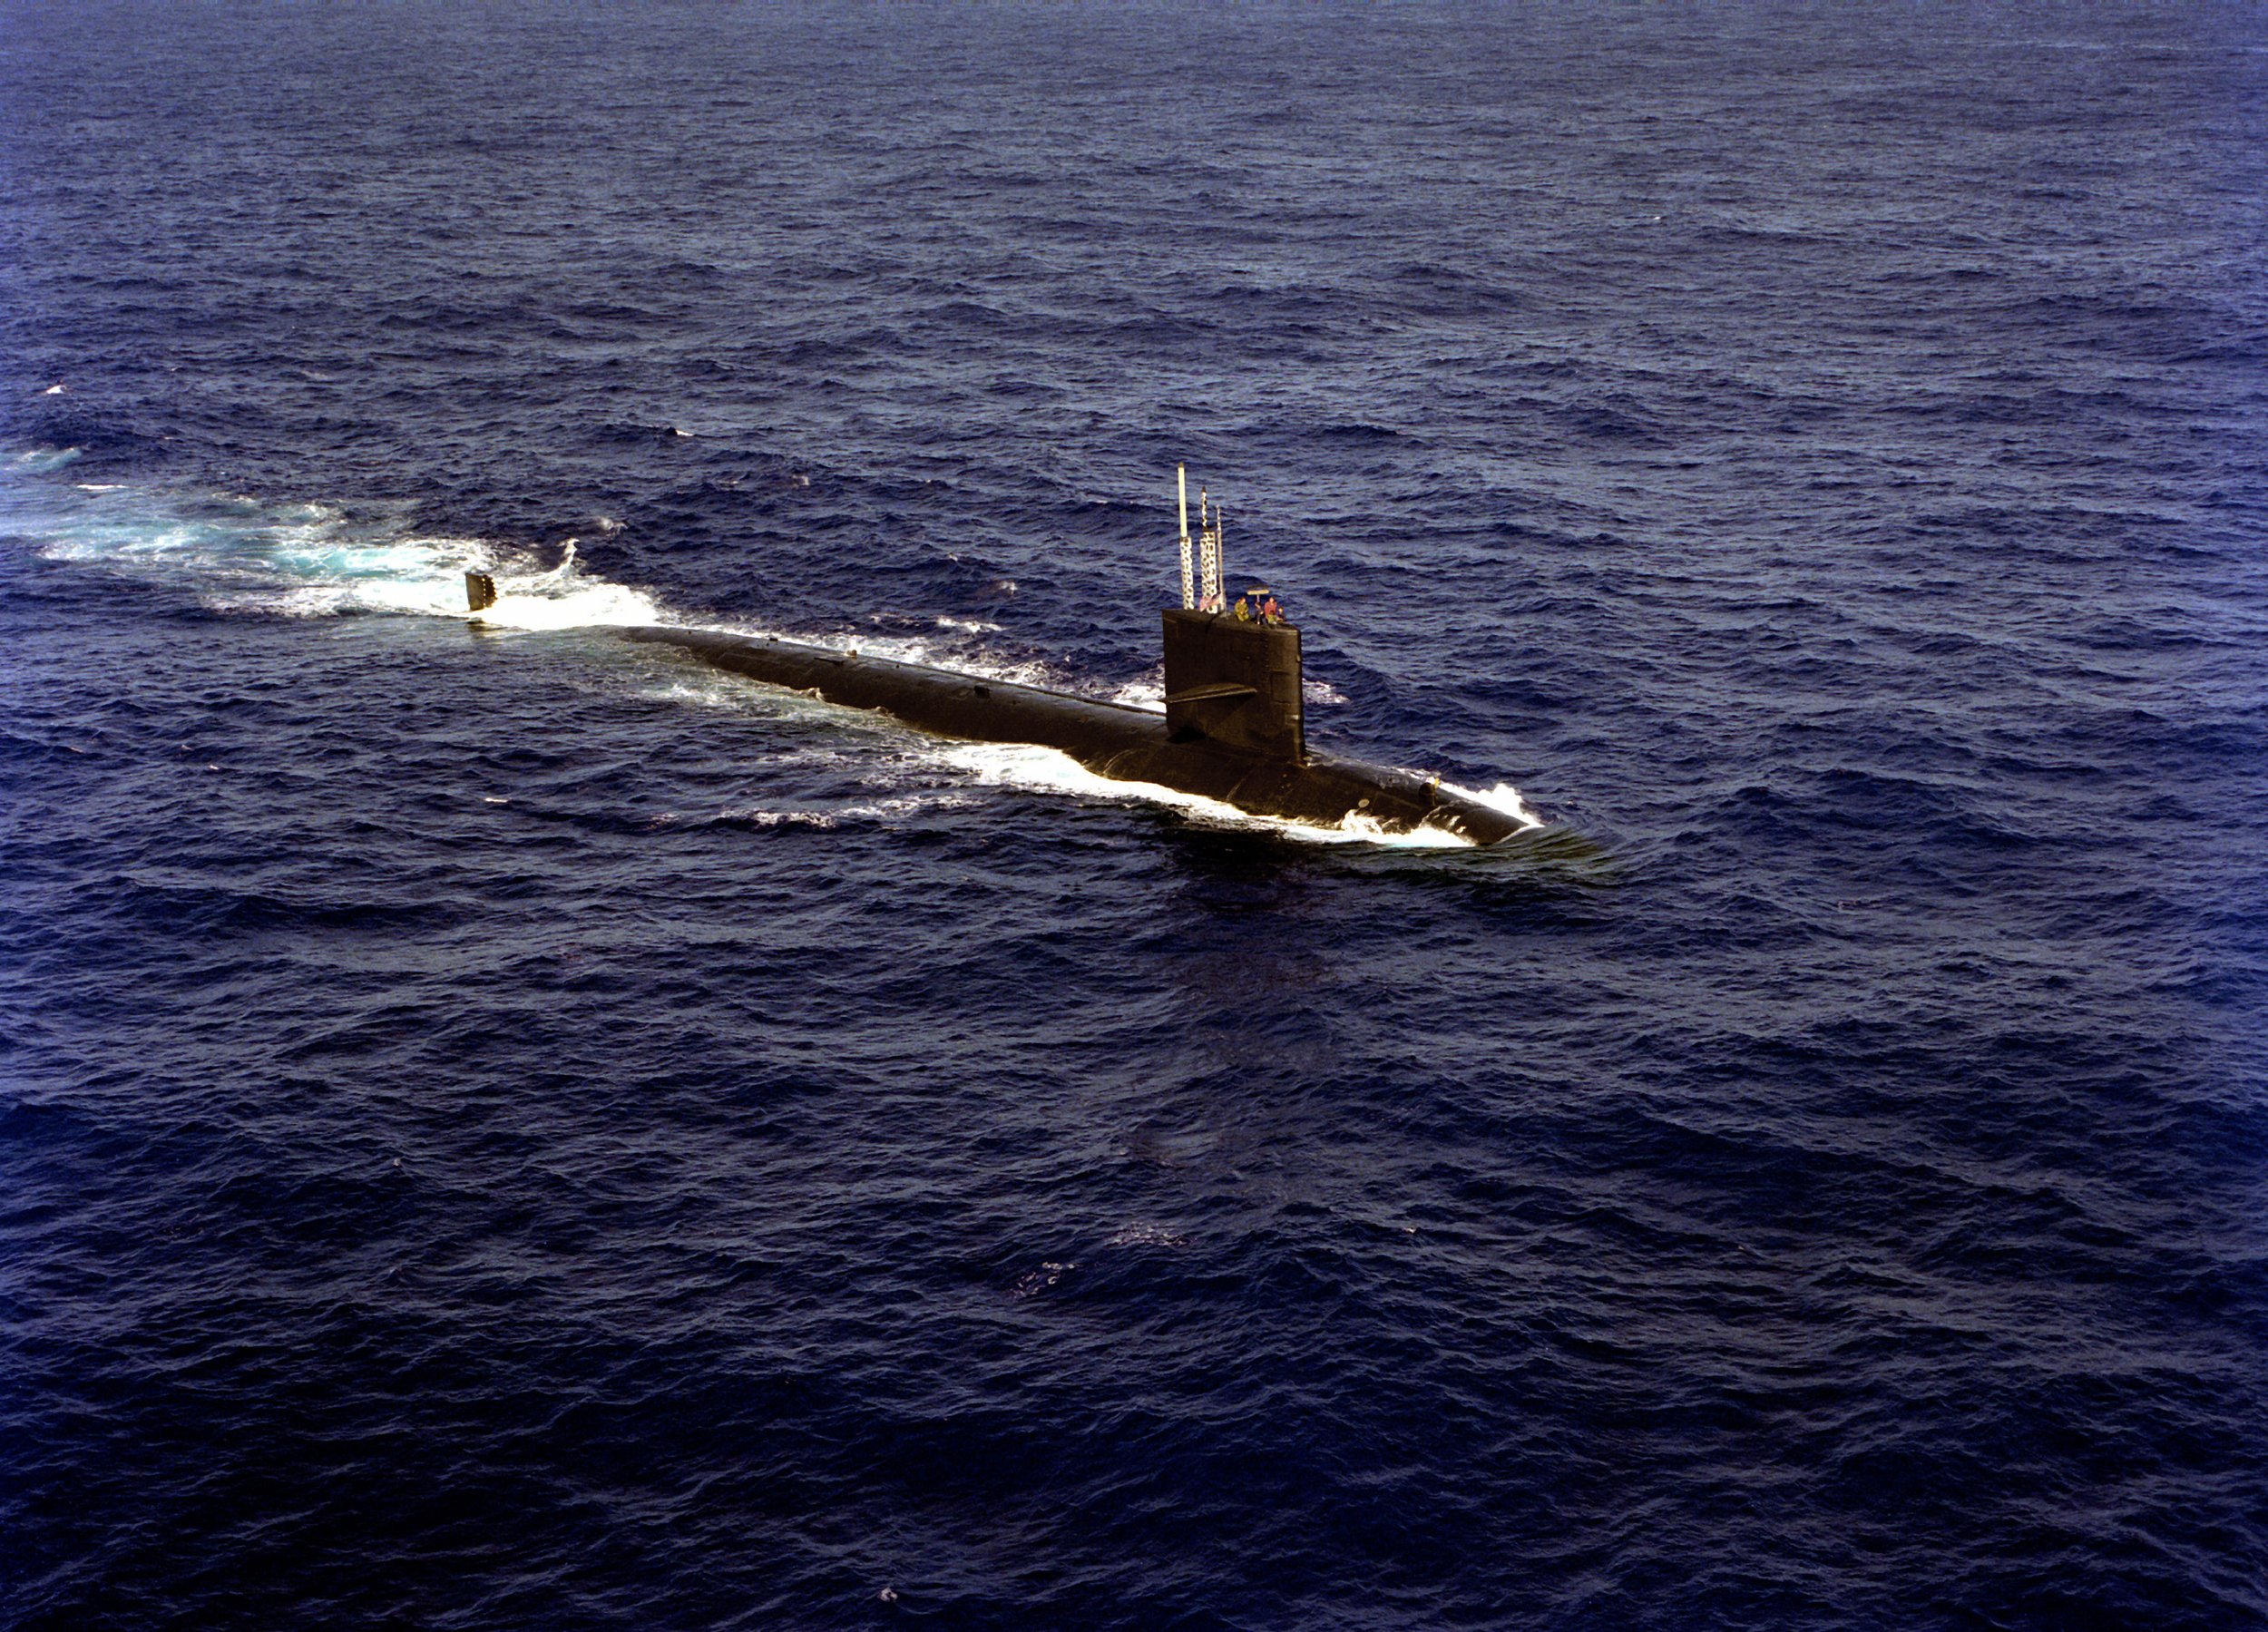  USS Seahorse SSN-669, the second submarine Darrel served aboard. At 292 feet, the Seahorse was the 47th nuclear-powered attack submarine commissioned into the U.S. Navy. As described in minute 42 of the interview, Darrel’s job was to control the hea